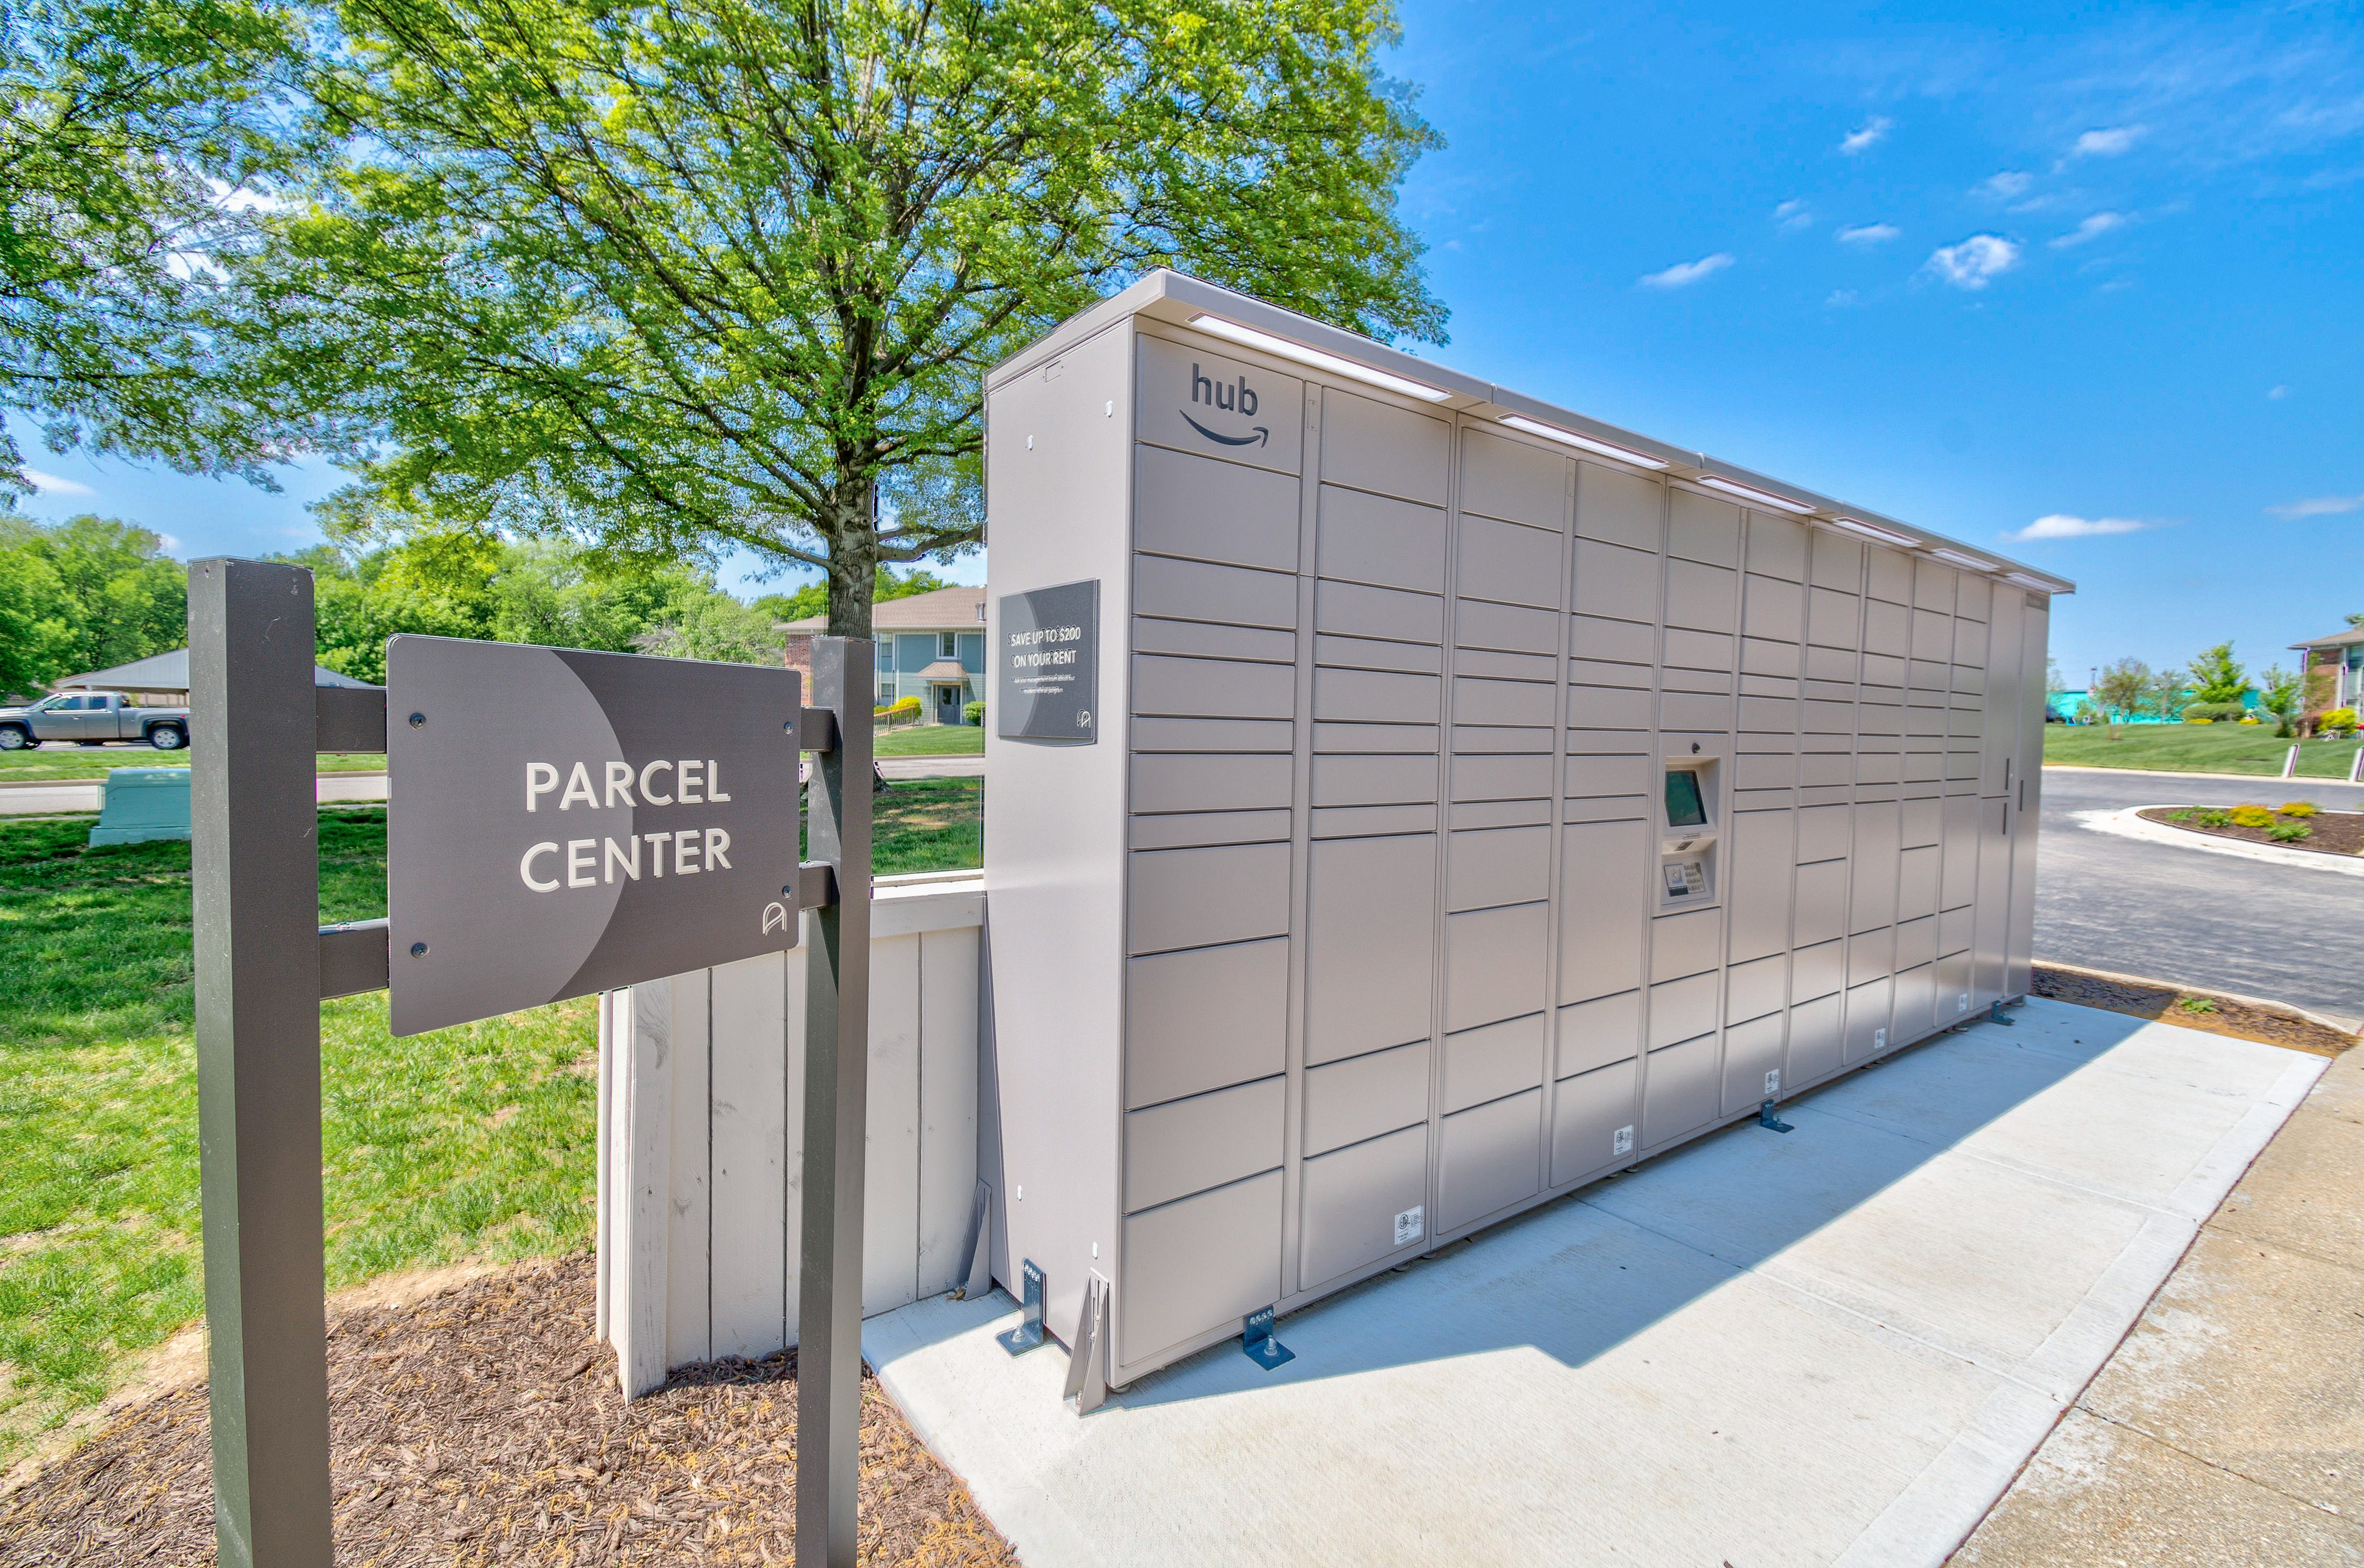 Amazon hub automated package center at The arbor in Blue Springs, Missouri